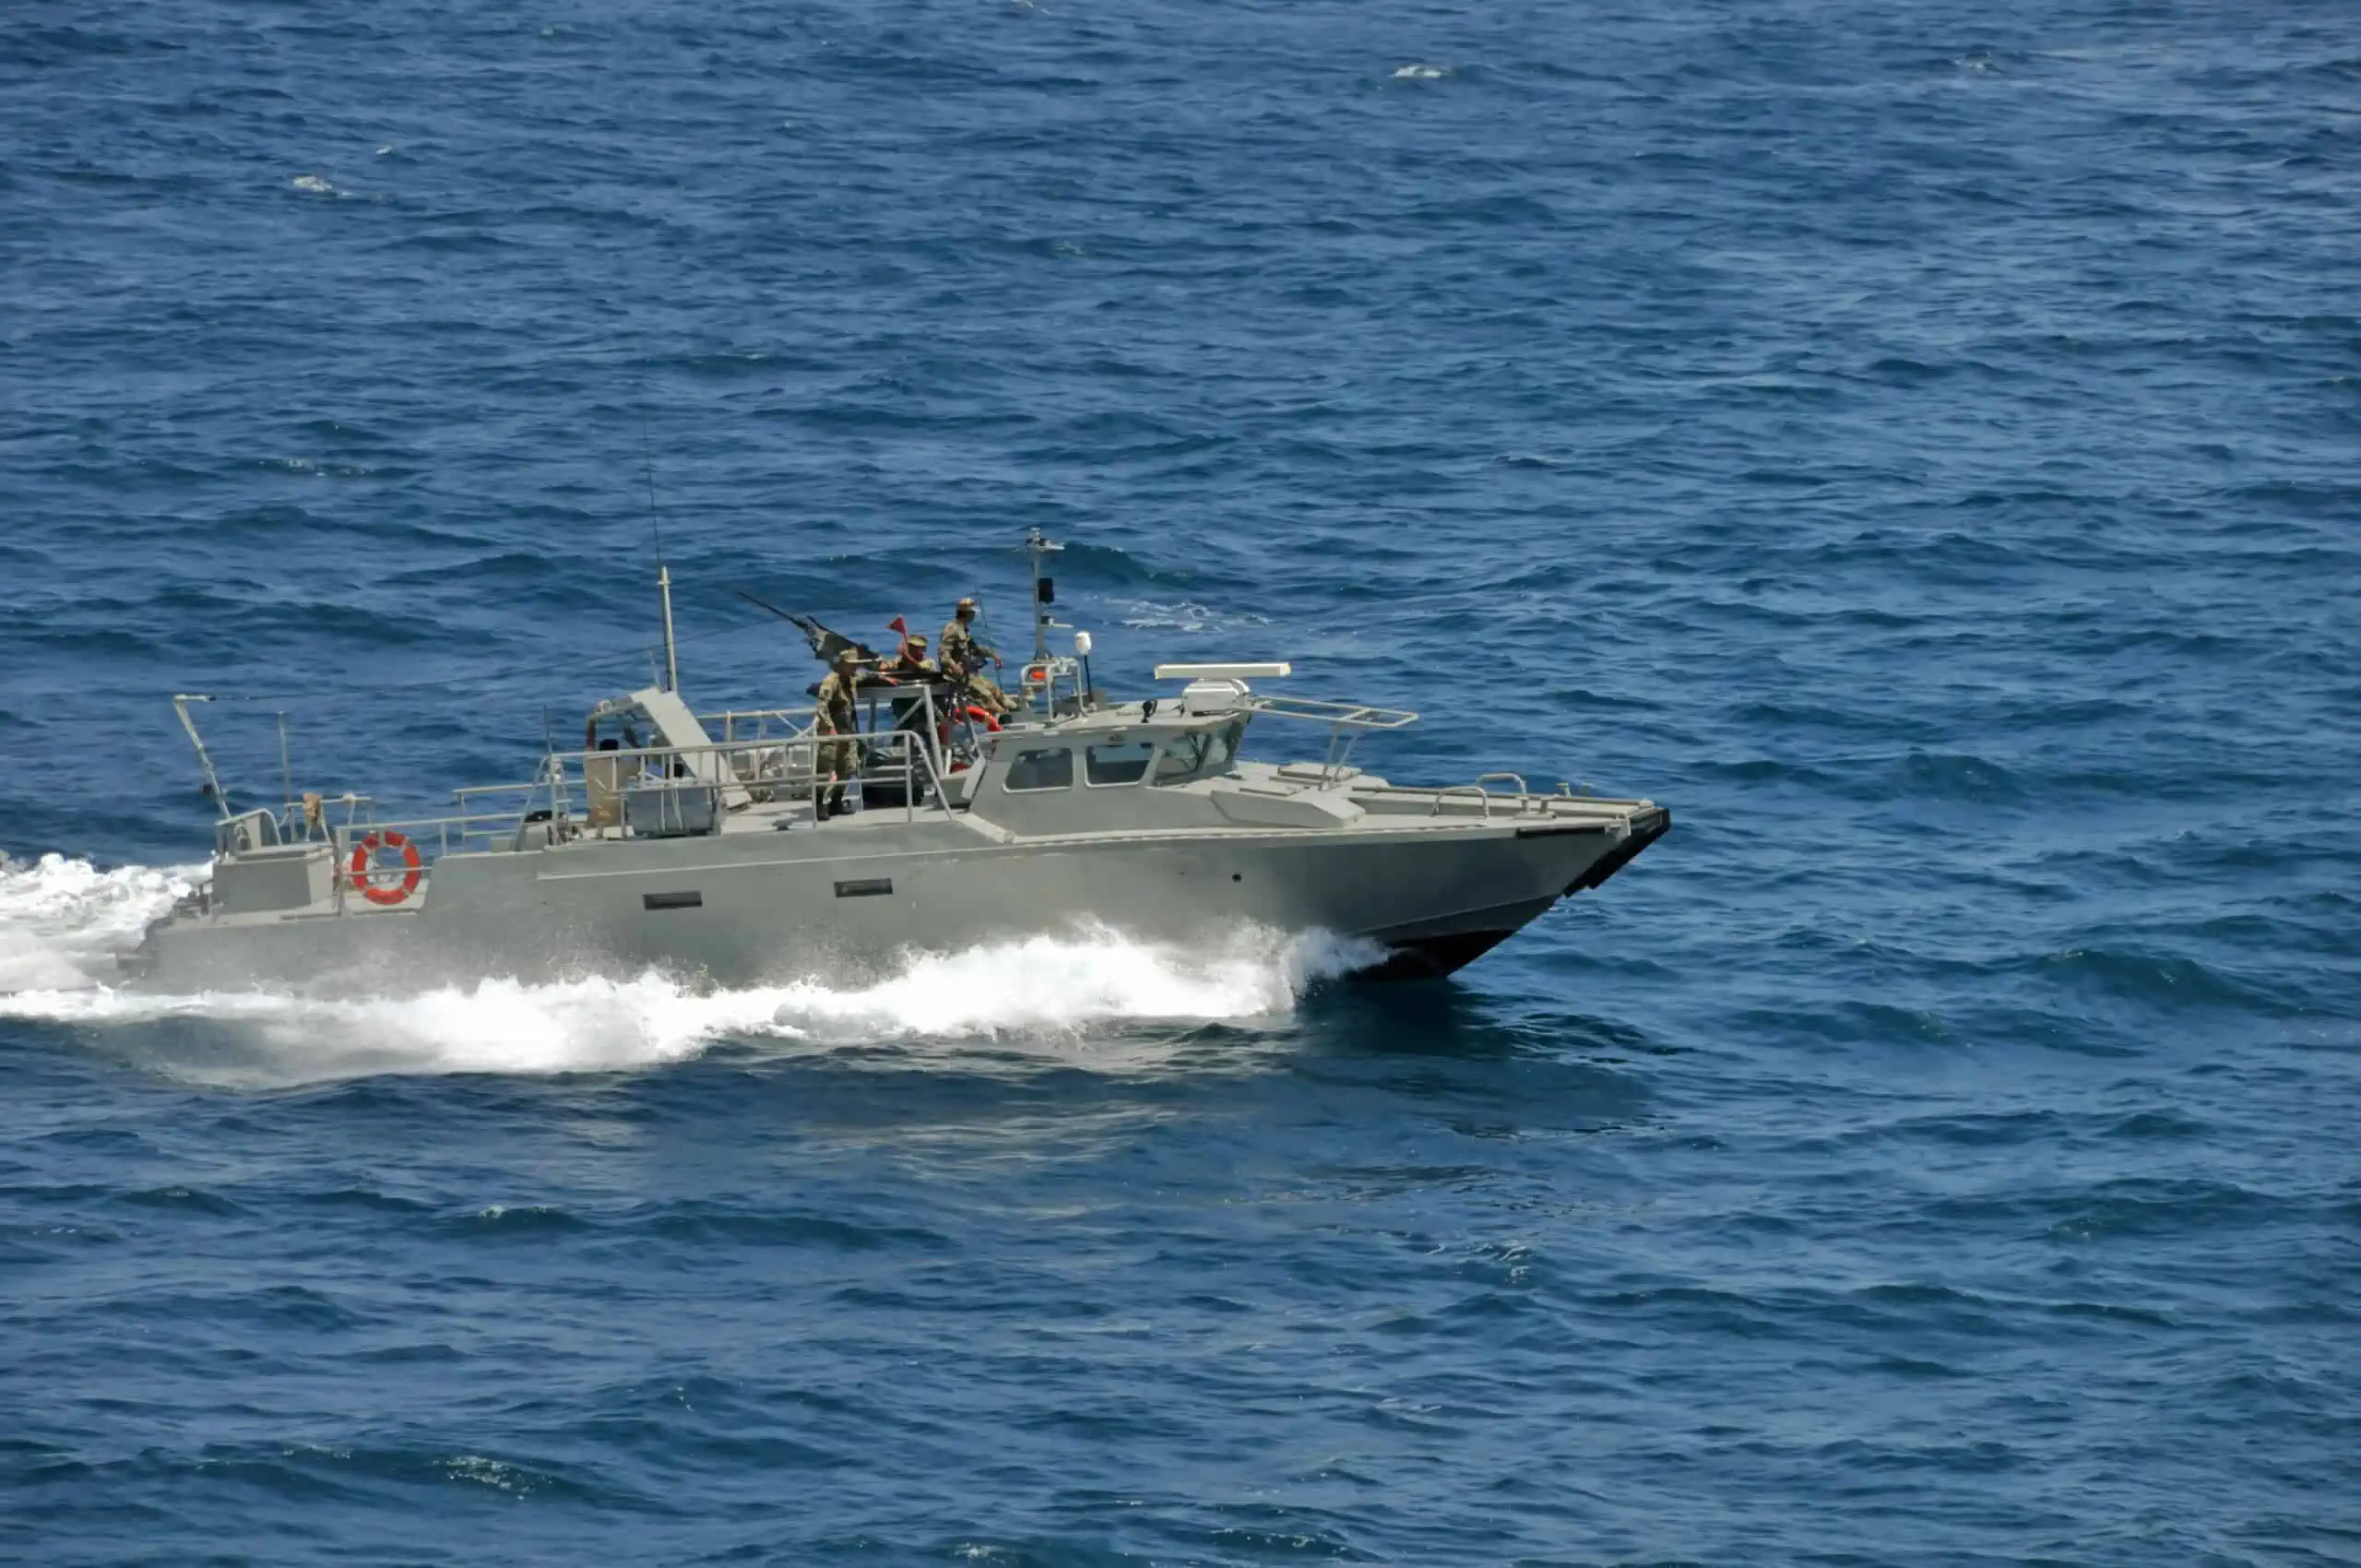 Military boat with maritime satellite communication